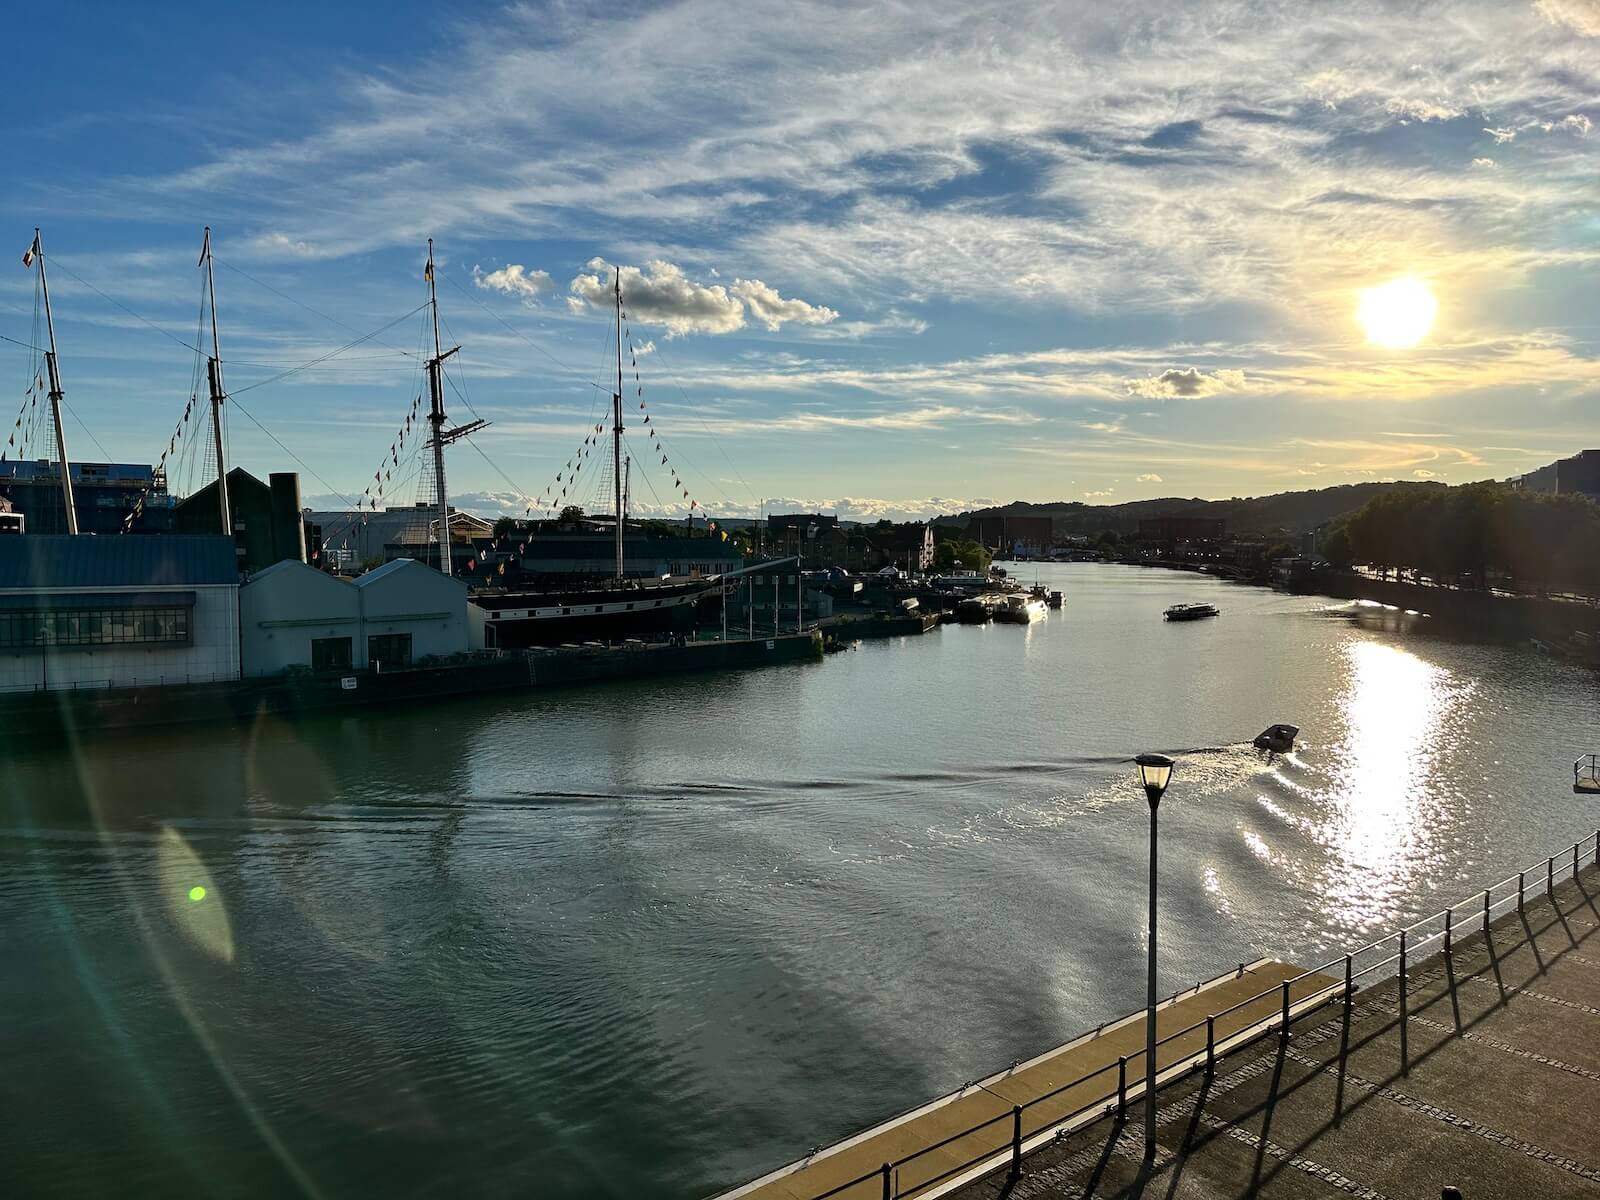 View of the Avon River in Bristol with SS Great Britain in the background